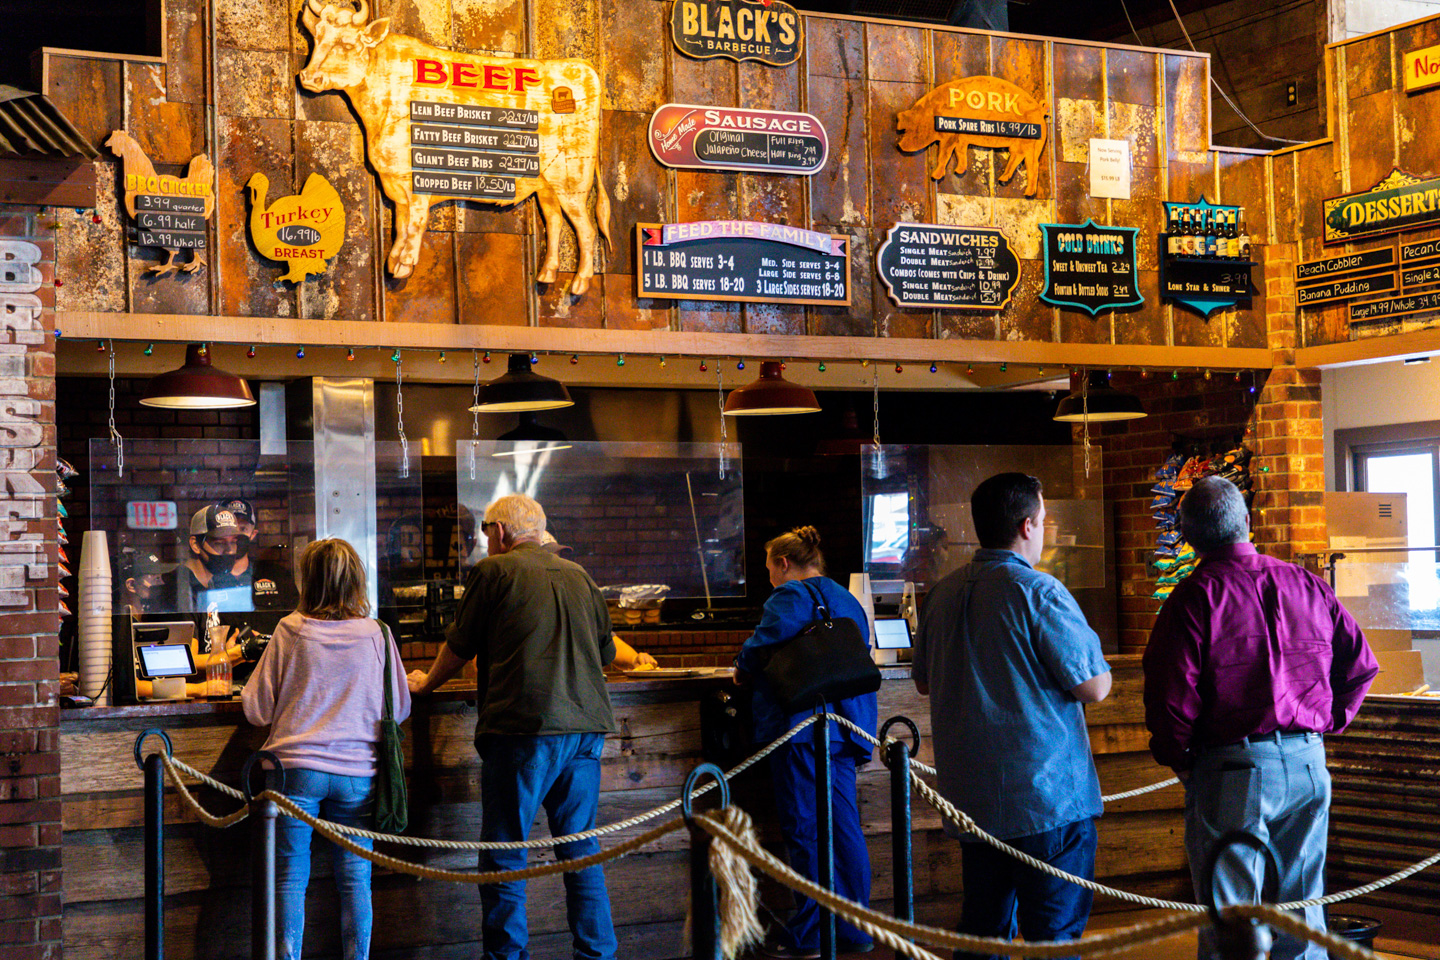 Customers Dining-in at Black's Barbecue New Braunfels